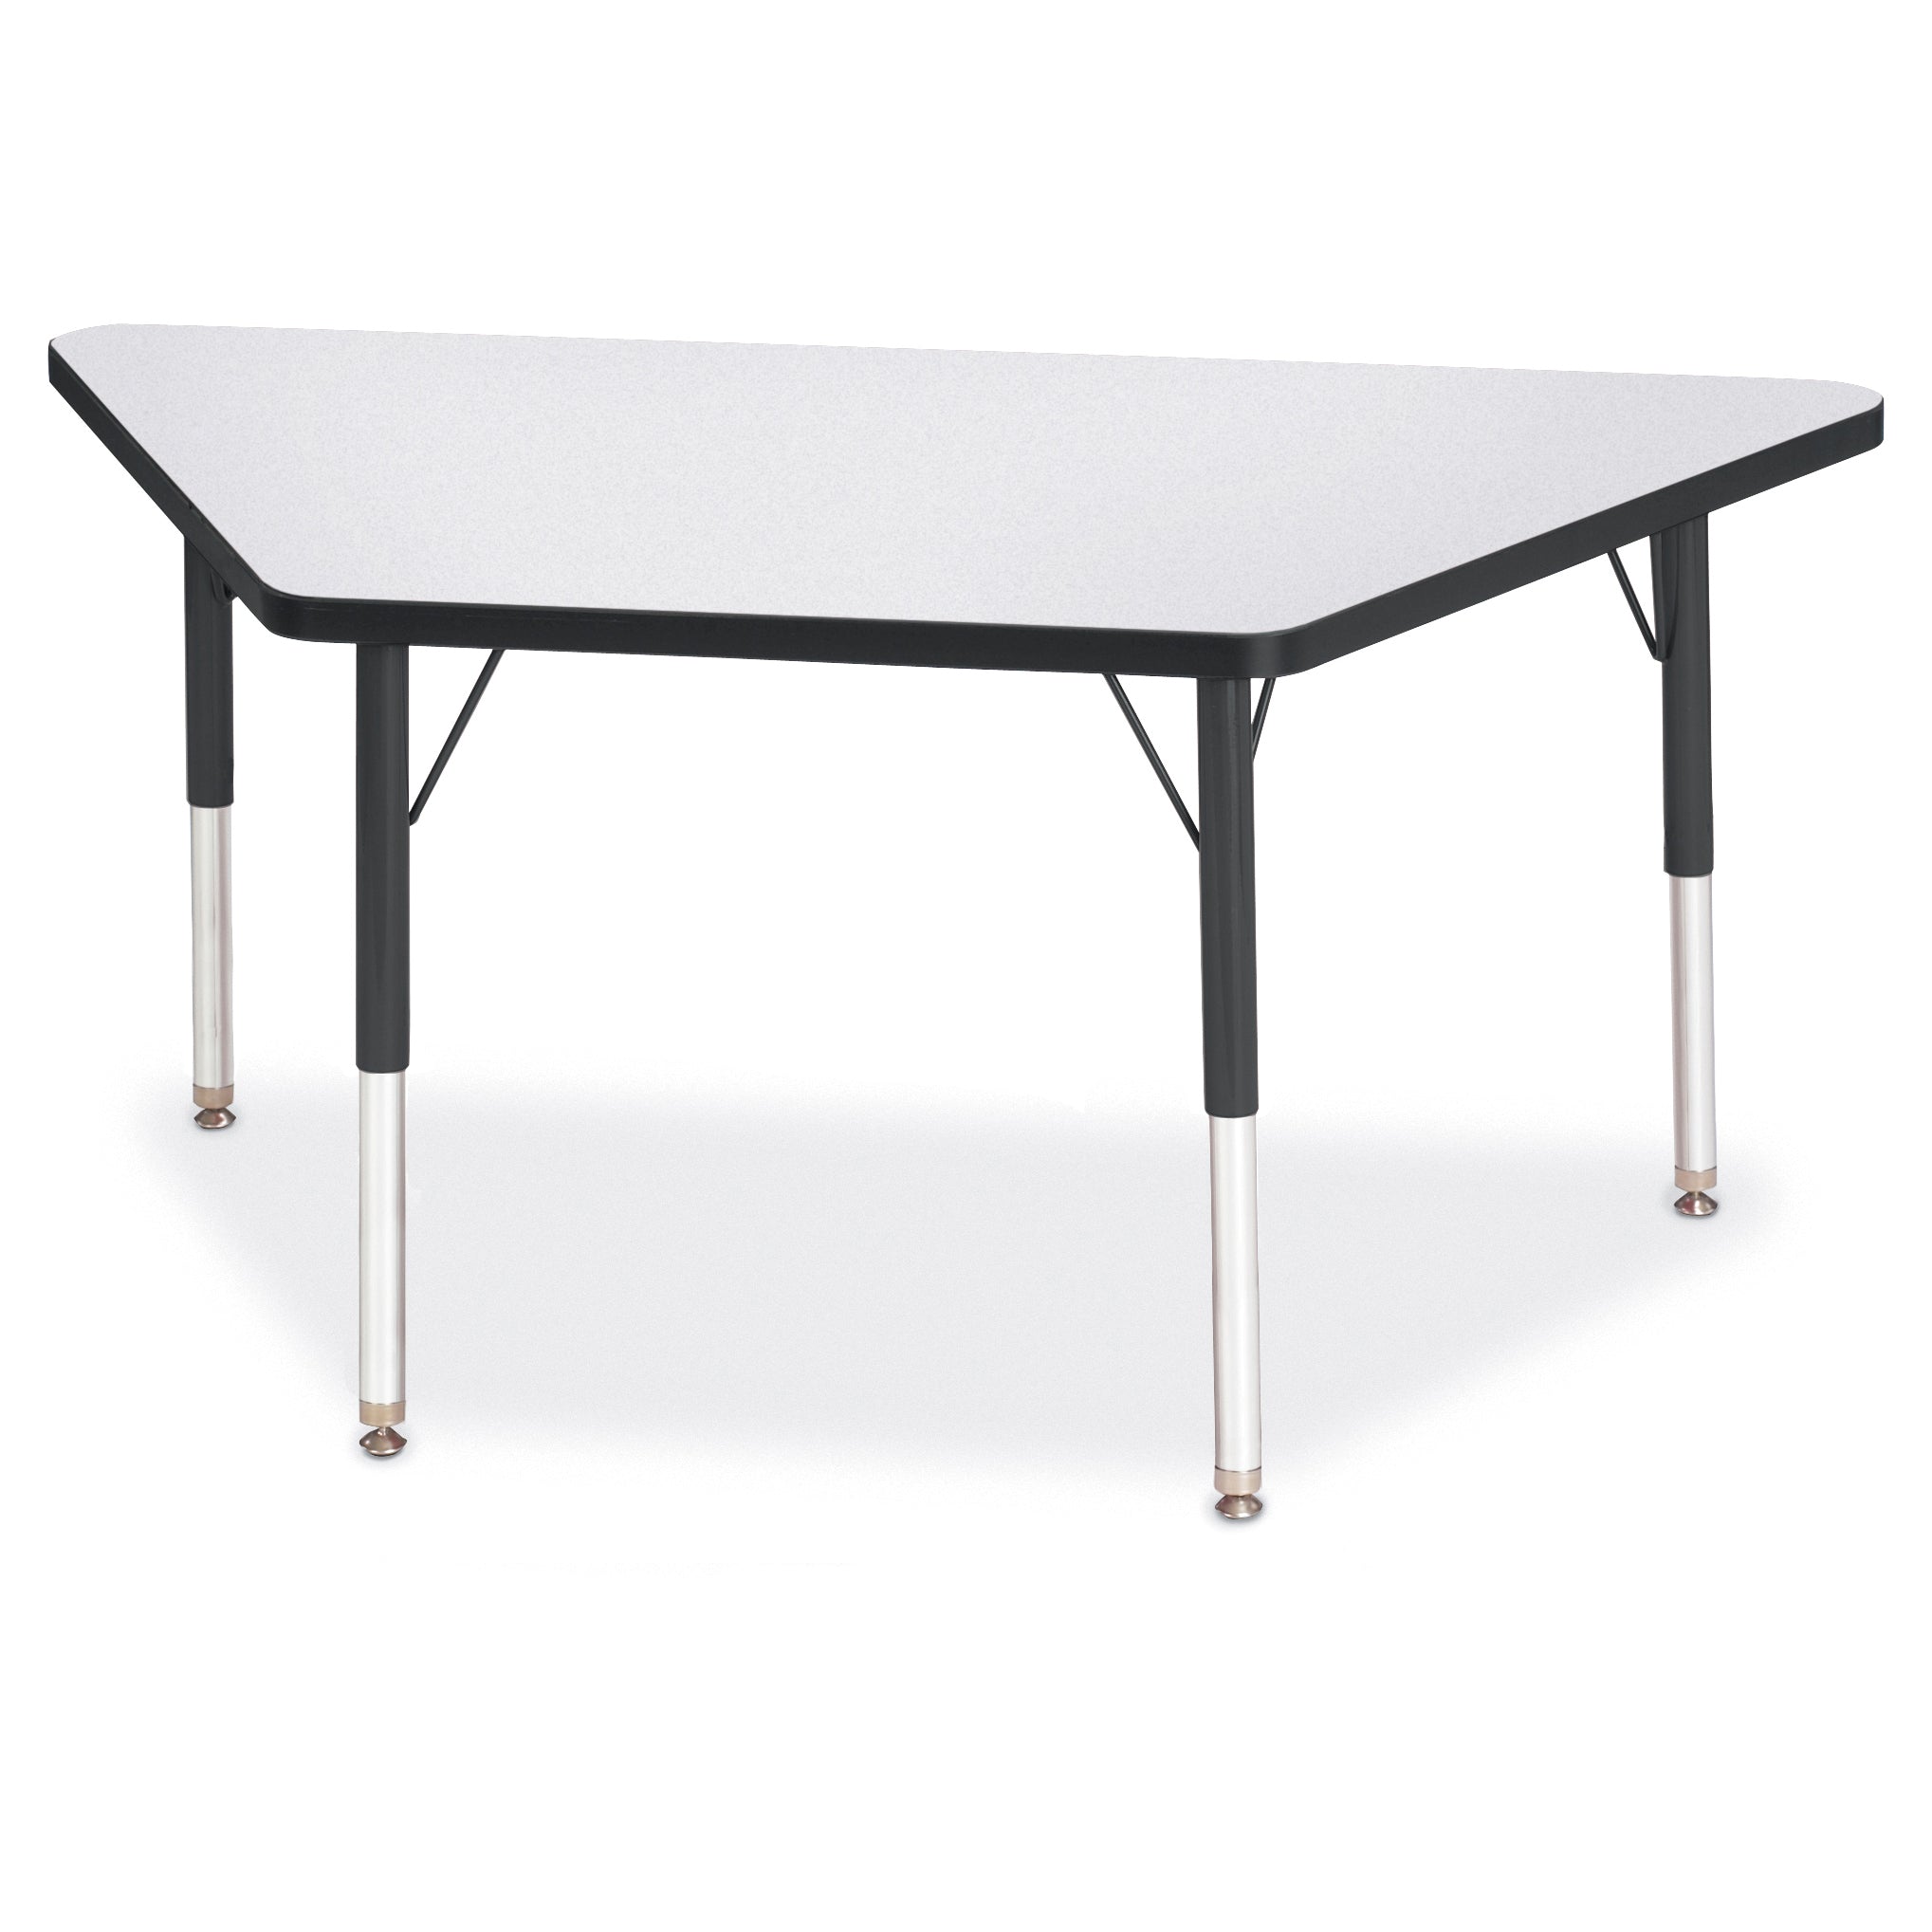 6438JCE180, Berries Trapezoid Activity Tables - 24" X 48", E-height - Freckled Gray/Black/Black